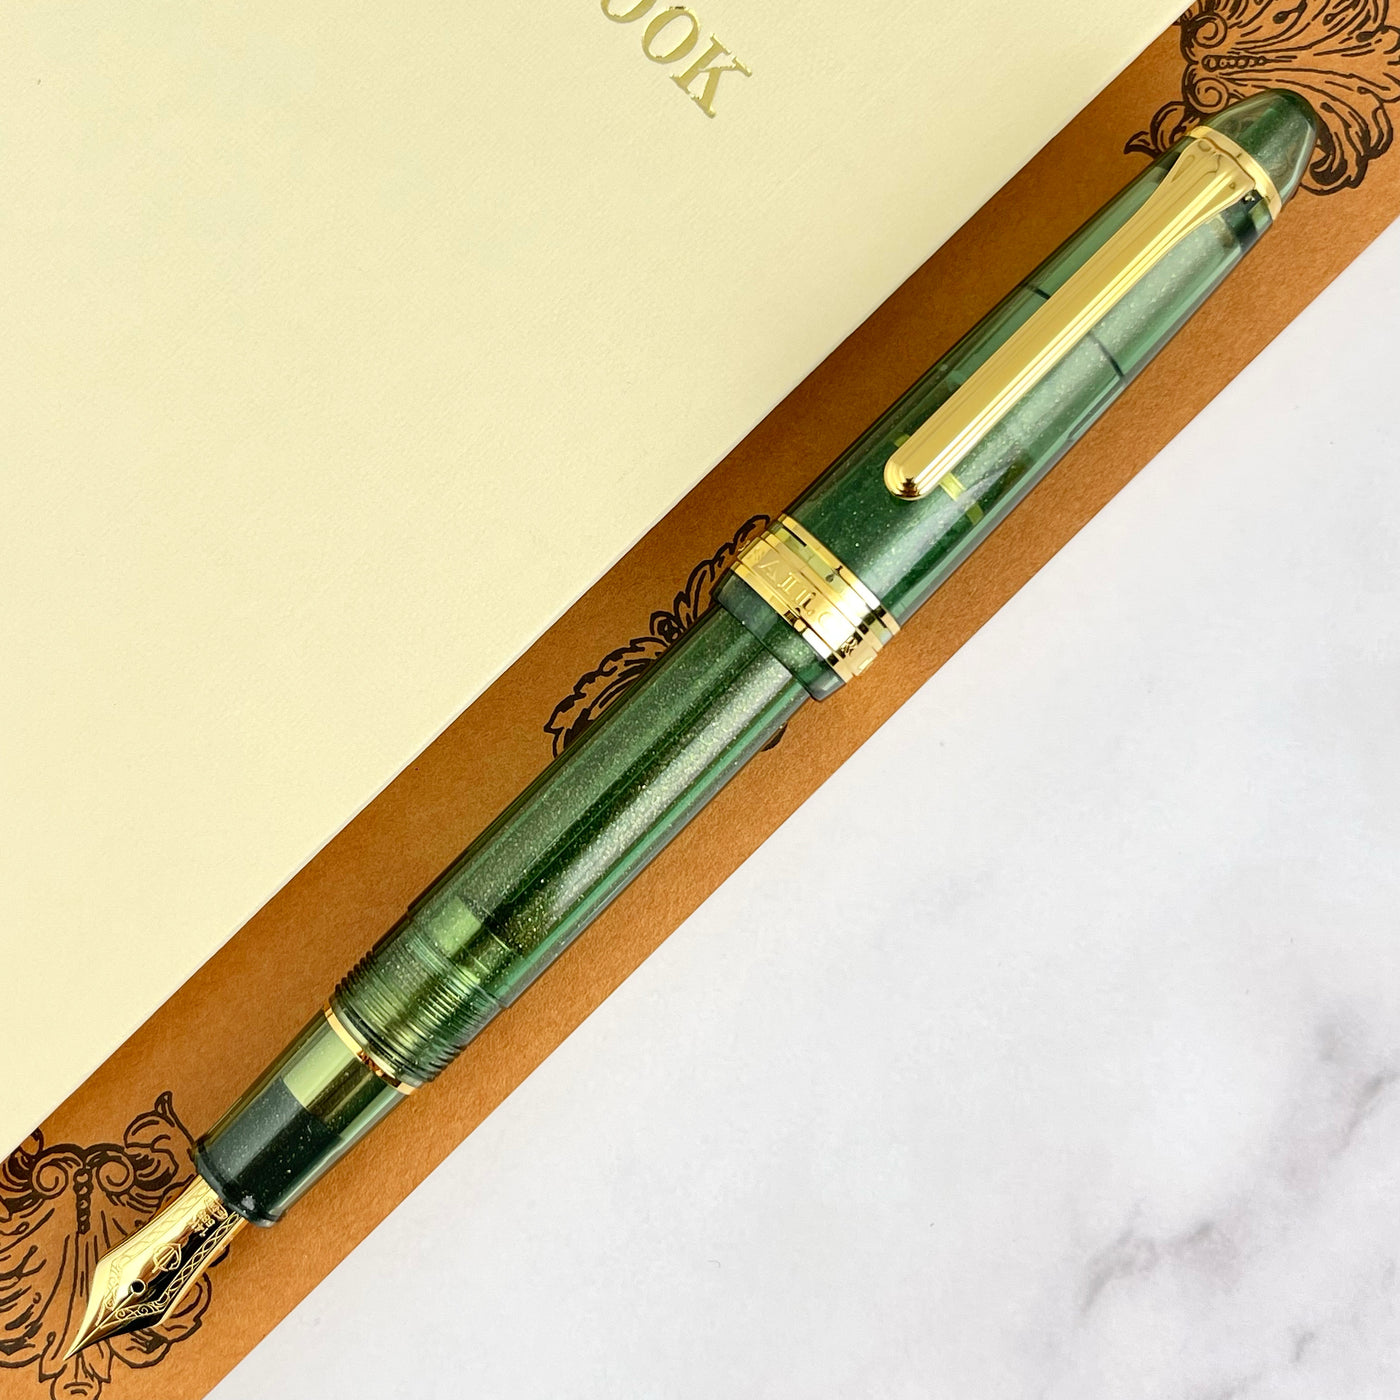 Sailor 1911S Pen of the Year Fountain Pen - Golden Olive (Special Edition)